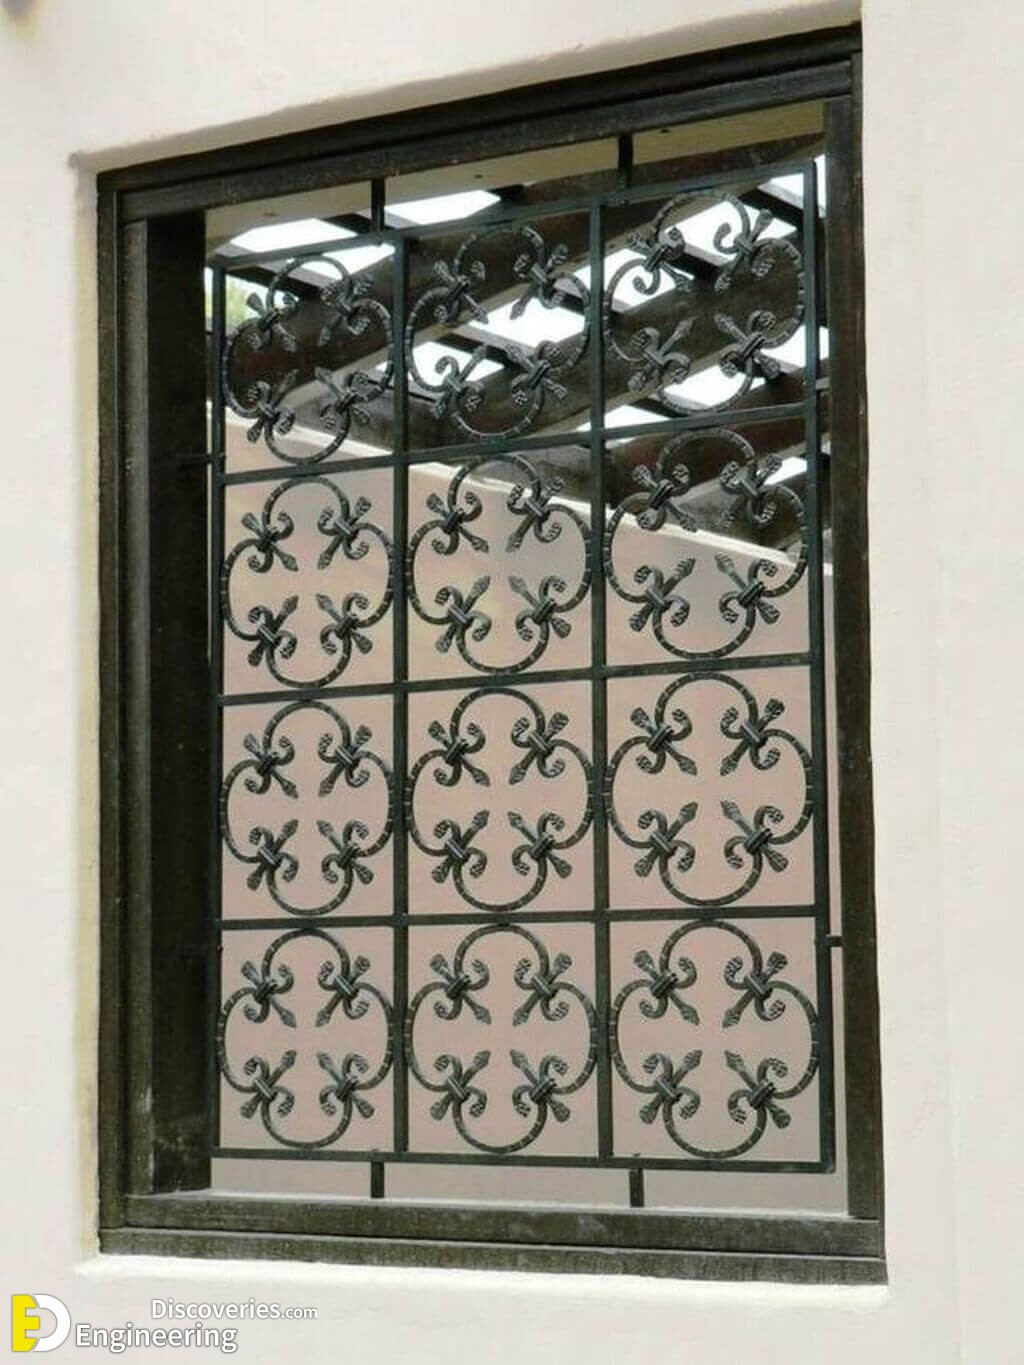 Elegant Window Grill Designs Ideas For Homes - Engineering Discoveries